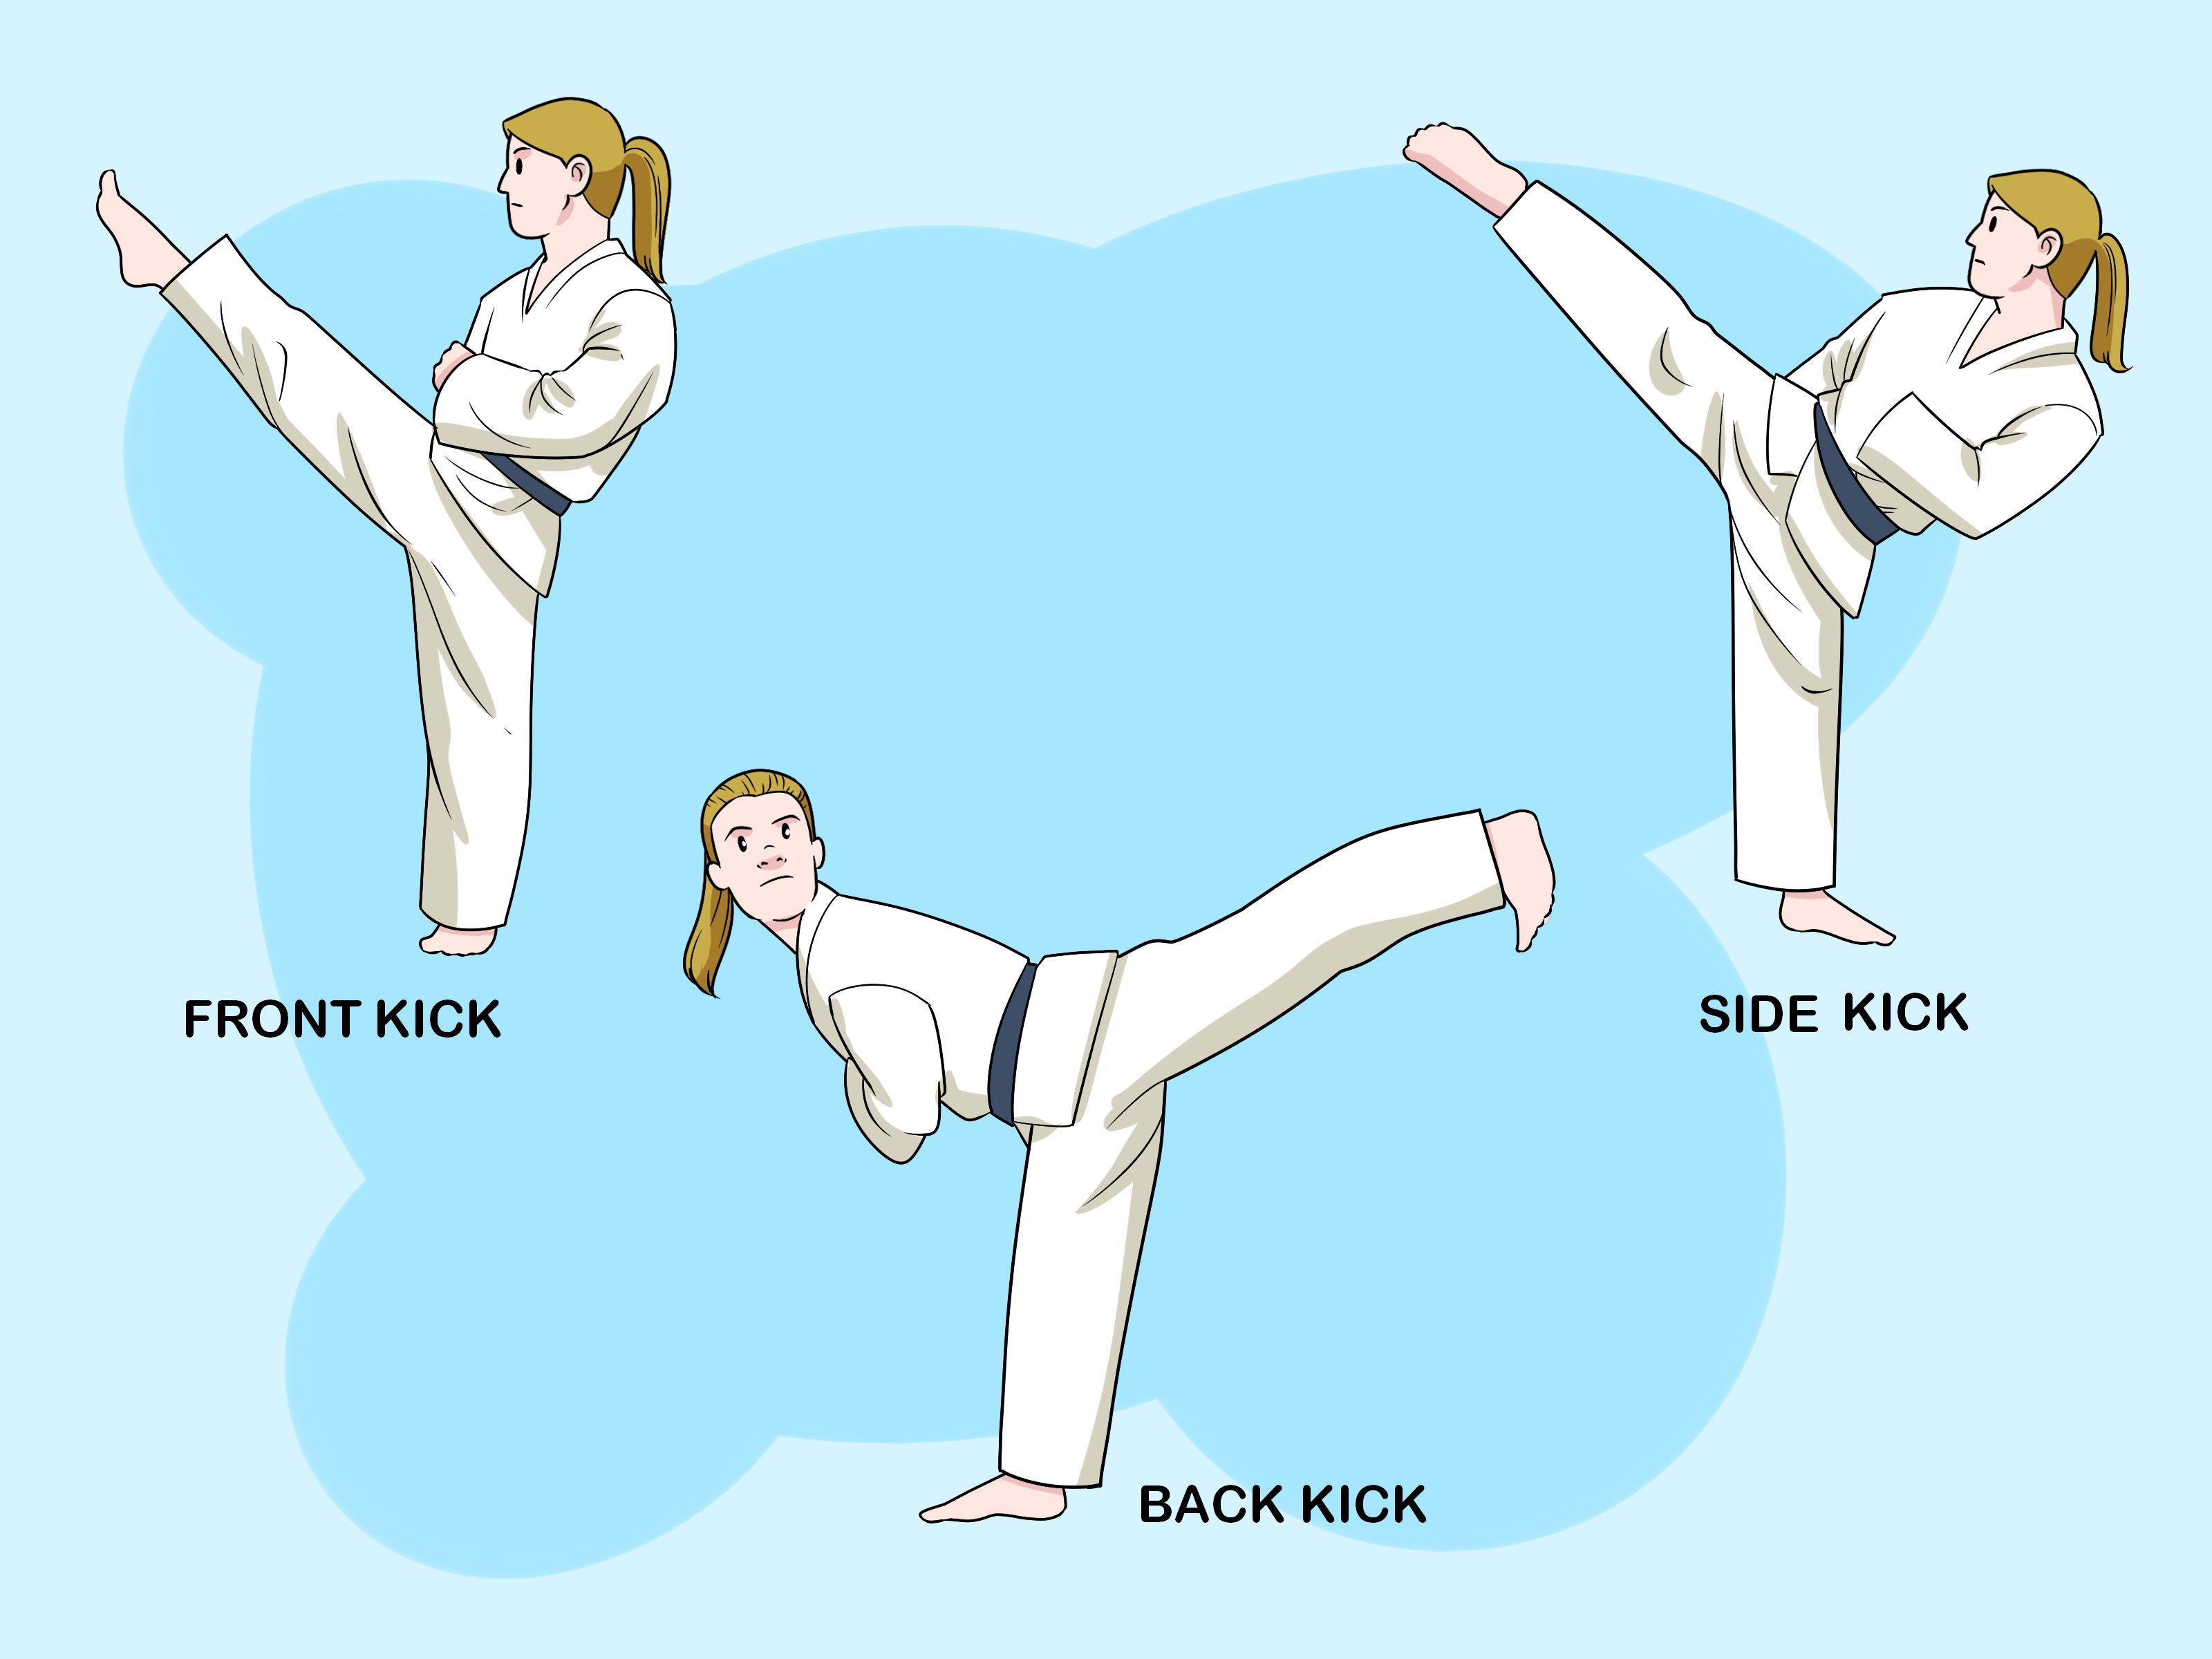 How to Understand Basic Karate: 10 Steps (with Picture)